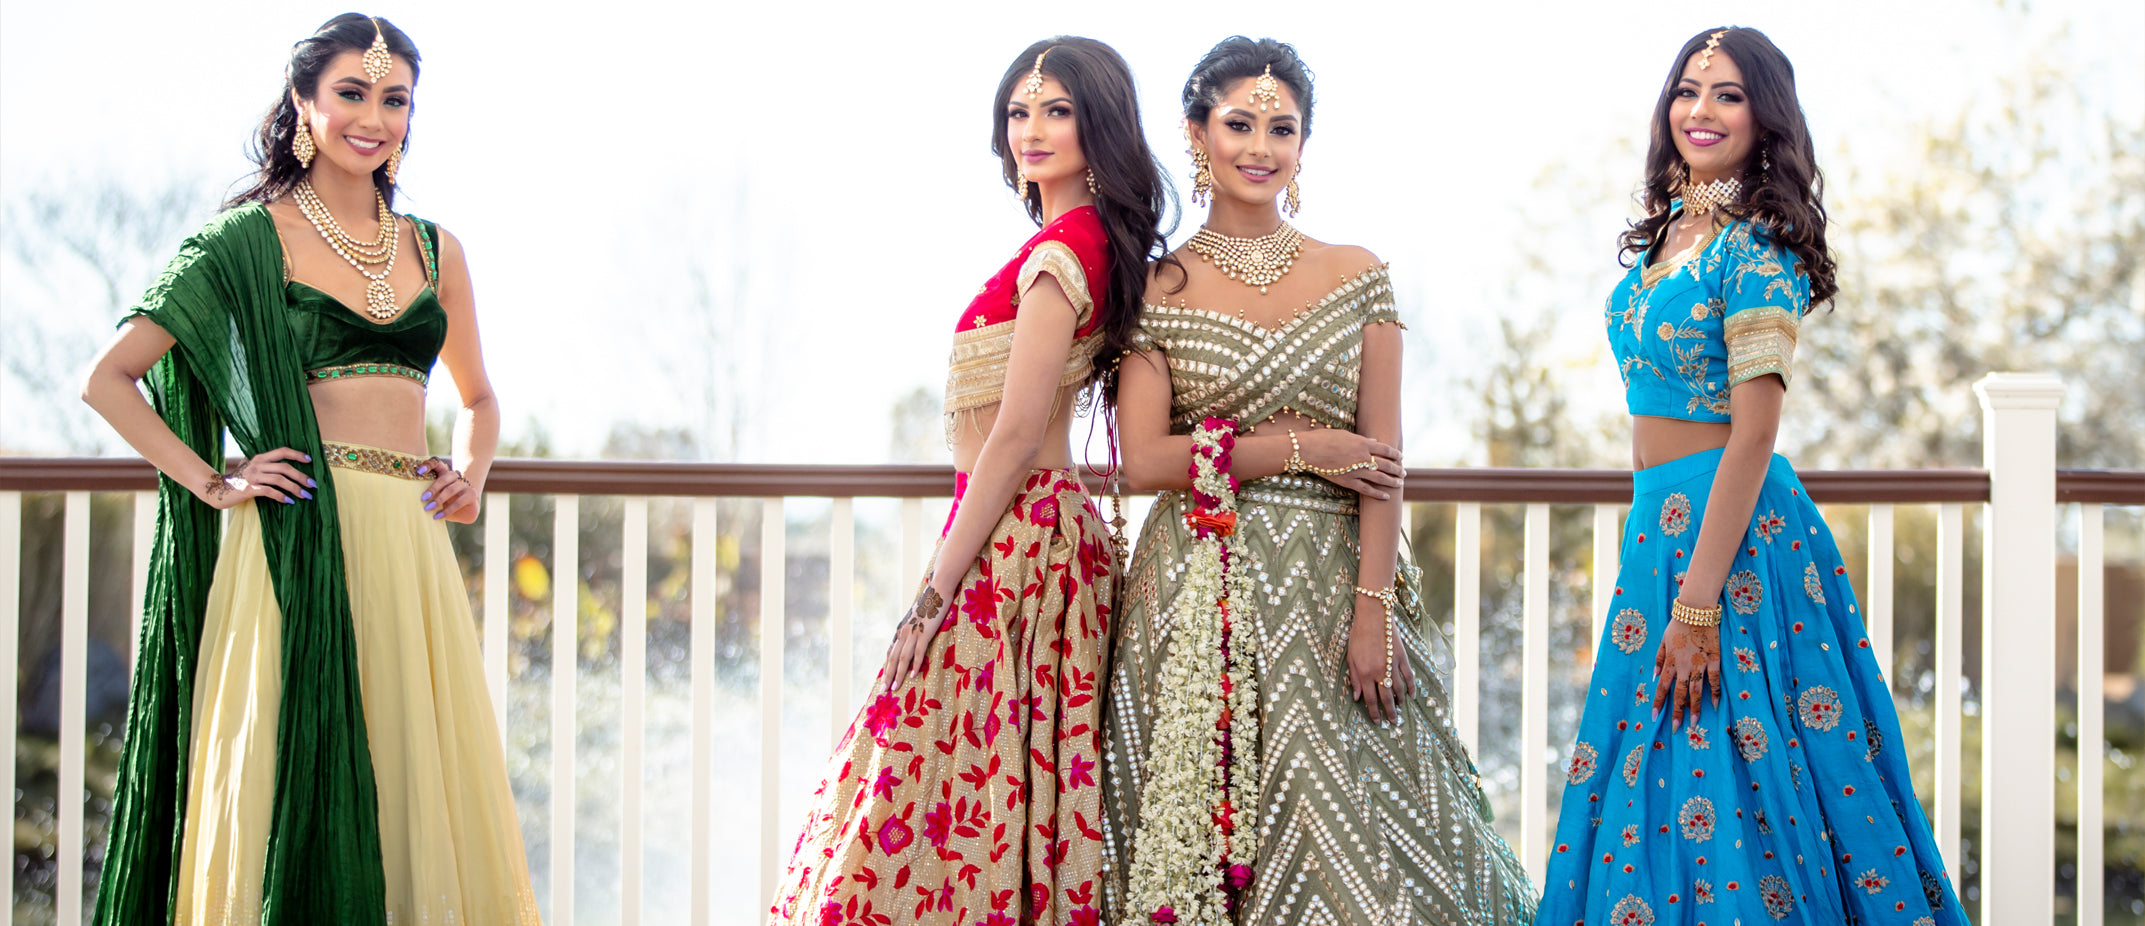 33+ Latest Modern Indian Wedding Dress ideas for guests in 2020